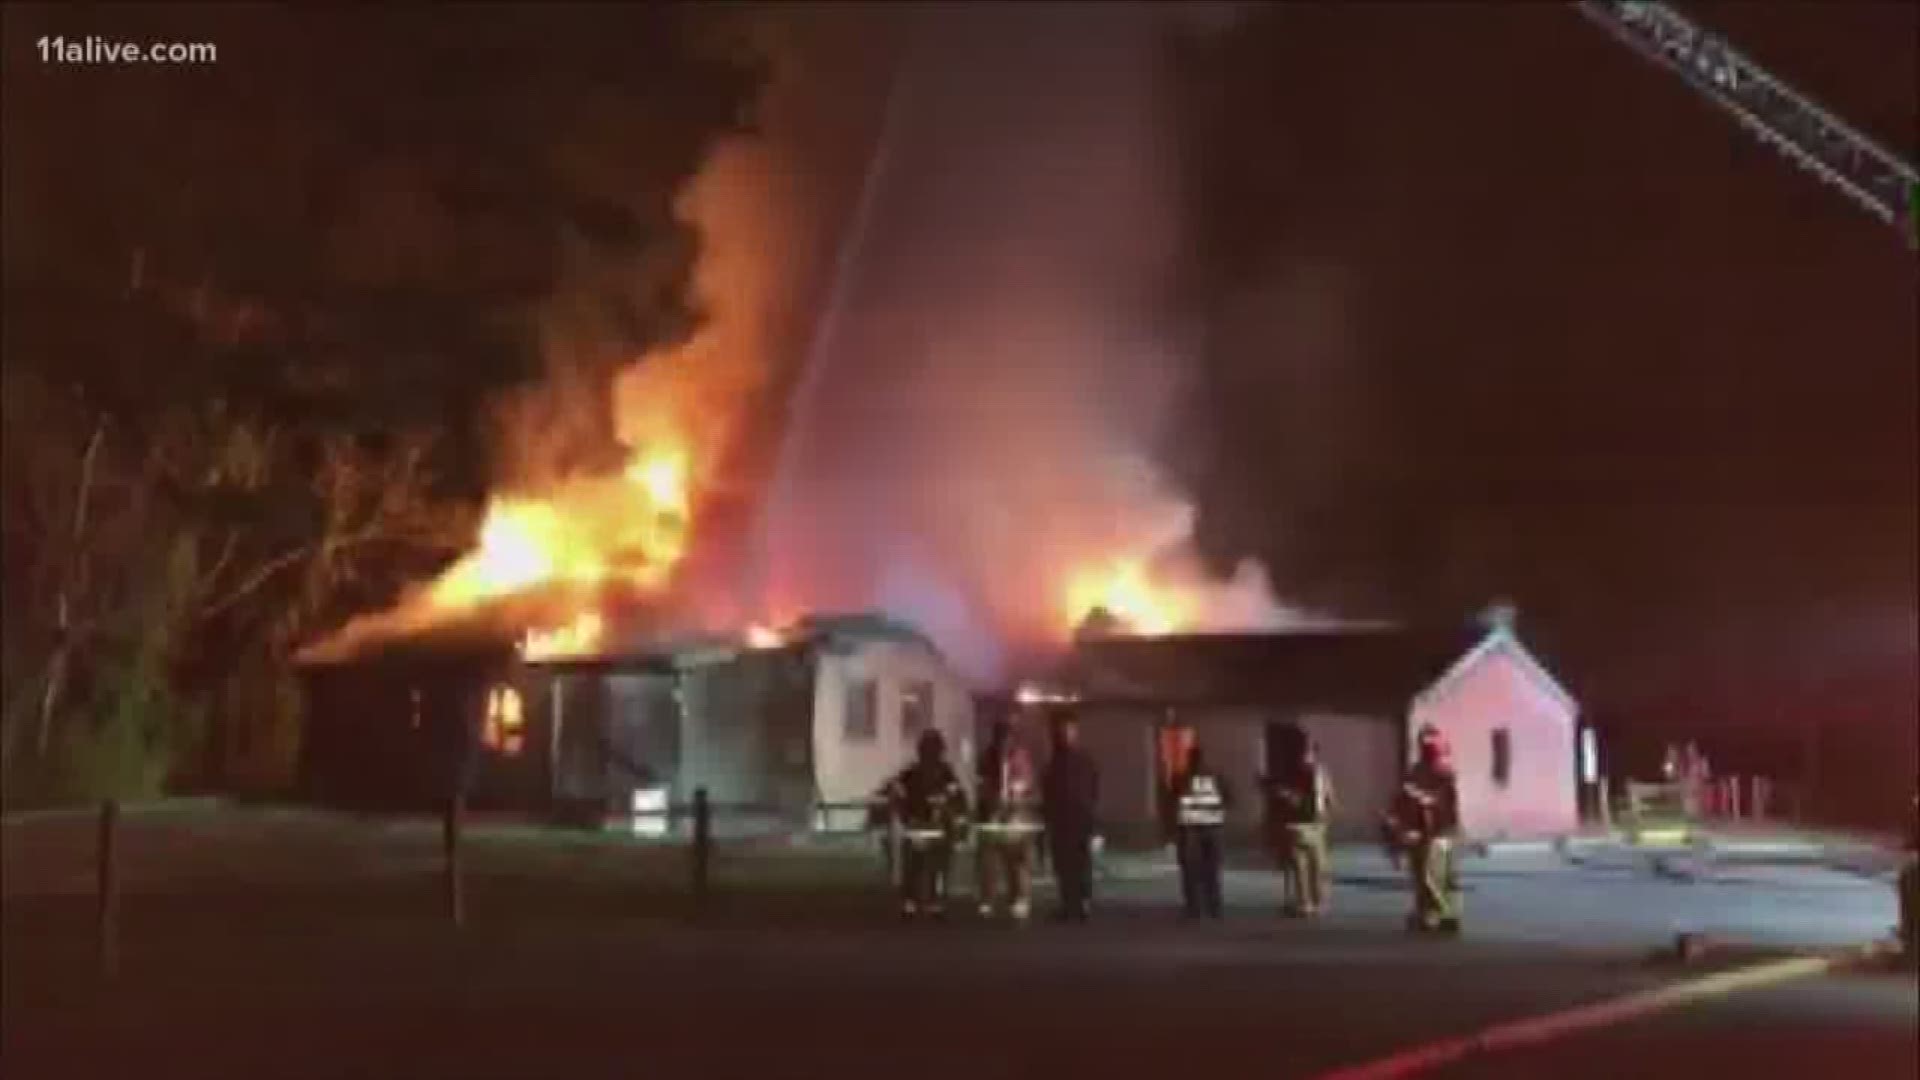 DeKalb fire officials said they were called to the scene around 3:30 a.m. to fight the fire at American Legion 207 off Pine Valley Road.